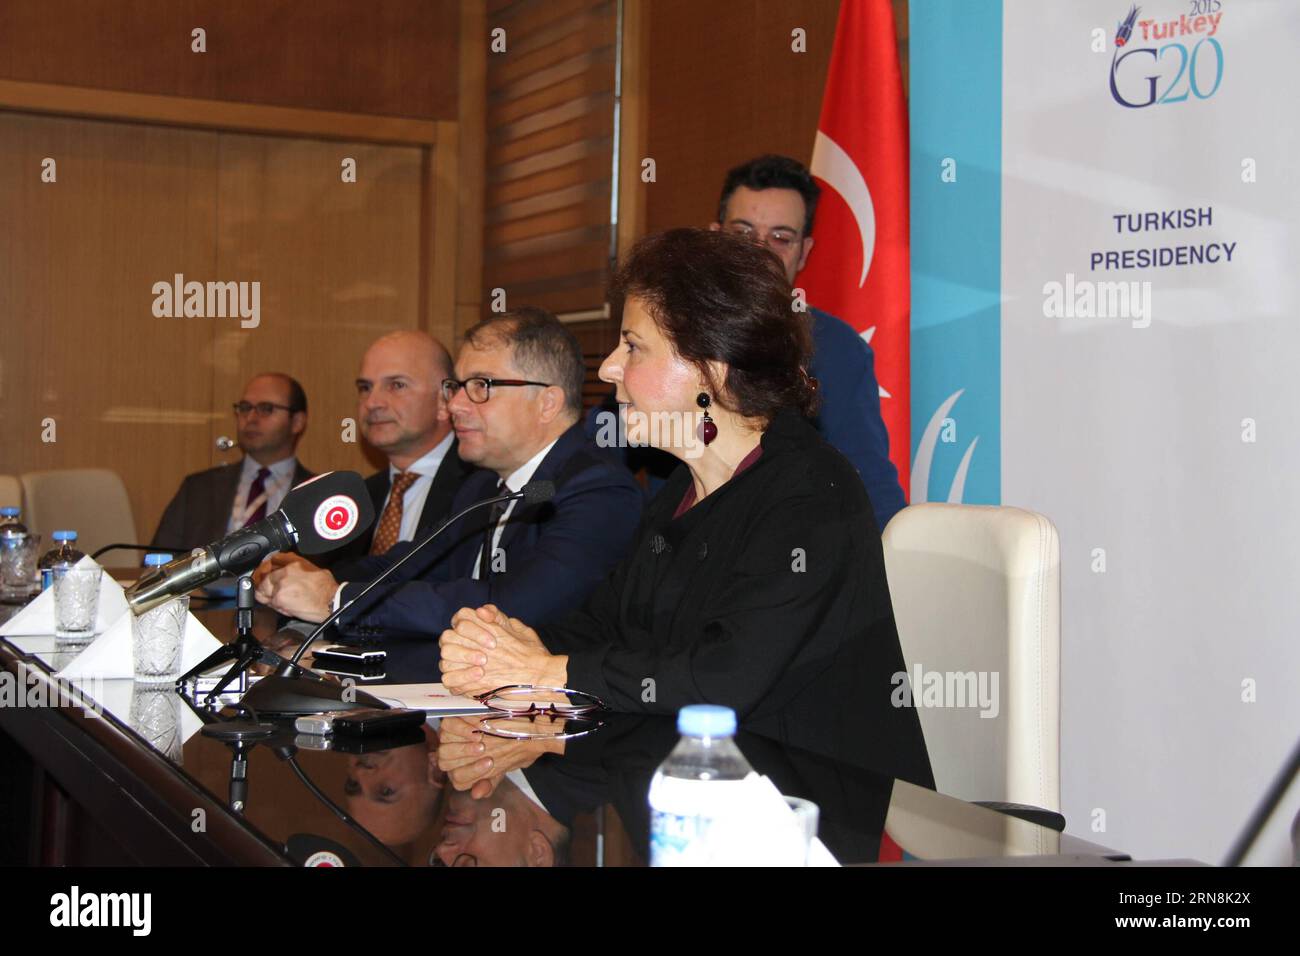 (151027) -- ANKARA, Oct. 27, 2015 -- Turkish Foreign Ministry deputy undersecretary Ayse Sinirlioglu (1st R) speaks during a press conference in the Turkish capital of Ankara, Oct. 27, 2015. The G20 summit that Turkey will host in November will discuss the crisis of migration amid high influx of Syrian refugees fleeing their war-torn country, a Turkish Foreign Ministry official said on Tuesday. Zheng Jinfa) TURKEY-ANKARA-G20 SUMMIT-PRESS CONFERENCE zhengjinfa PUBLICATIONxNOTxINxCHN   Ankara OCT 27 2015 Turkish Foreign Ministry Deputy Under Secretary Ayse  1st r Speaks during a Press Conference Stock Photo